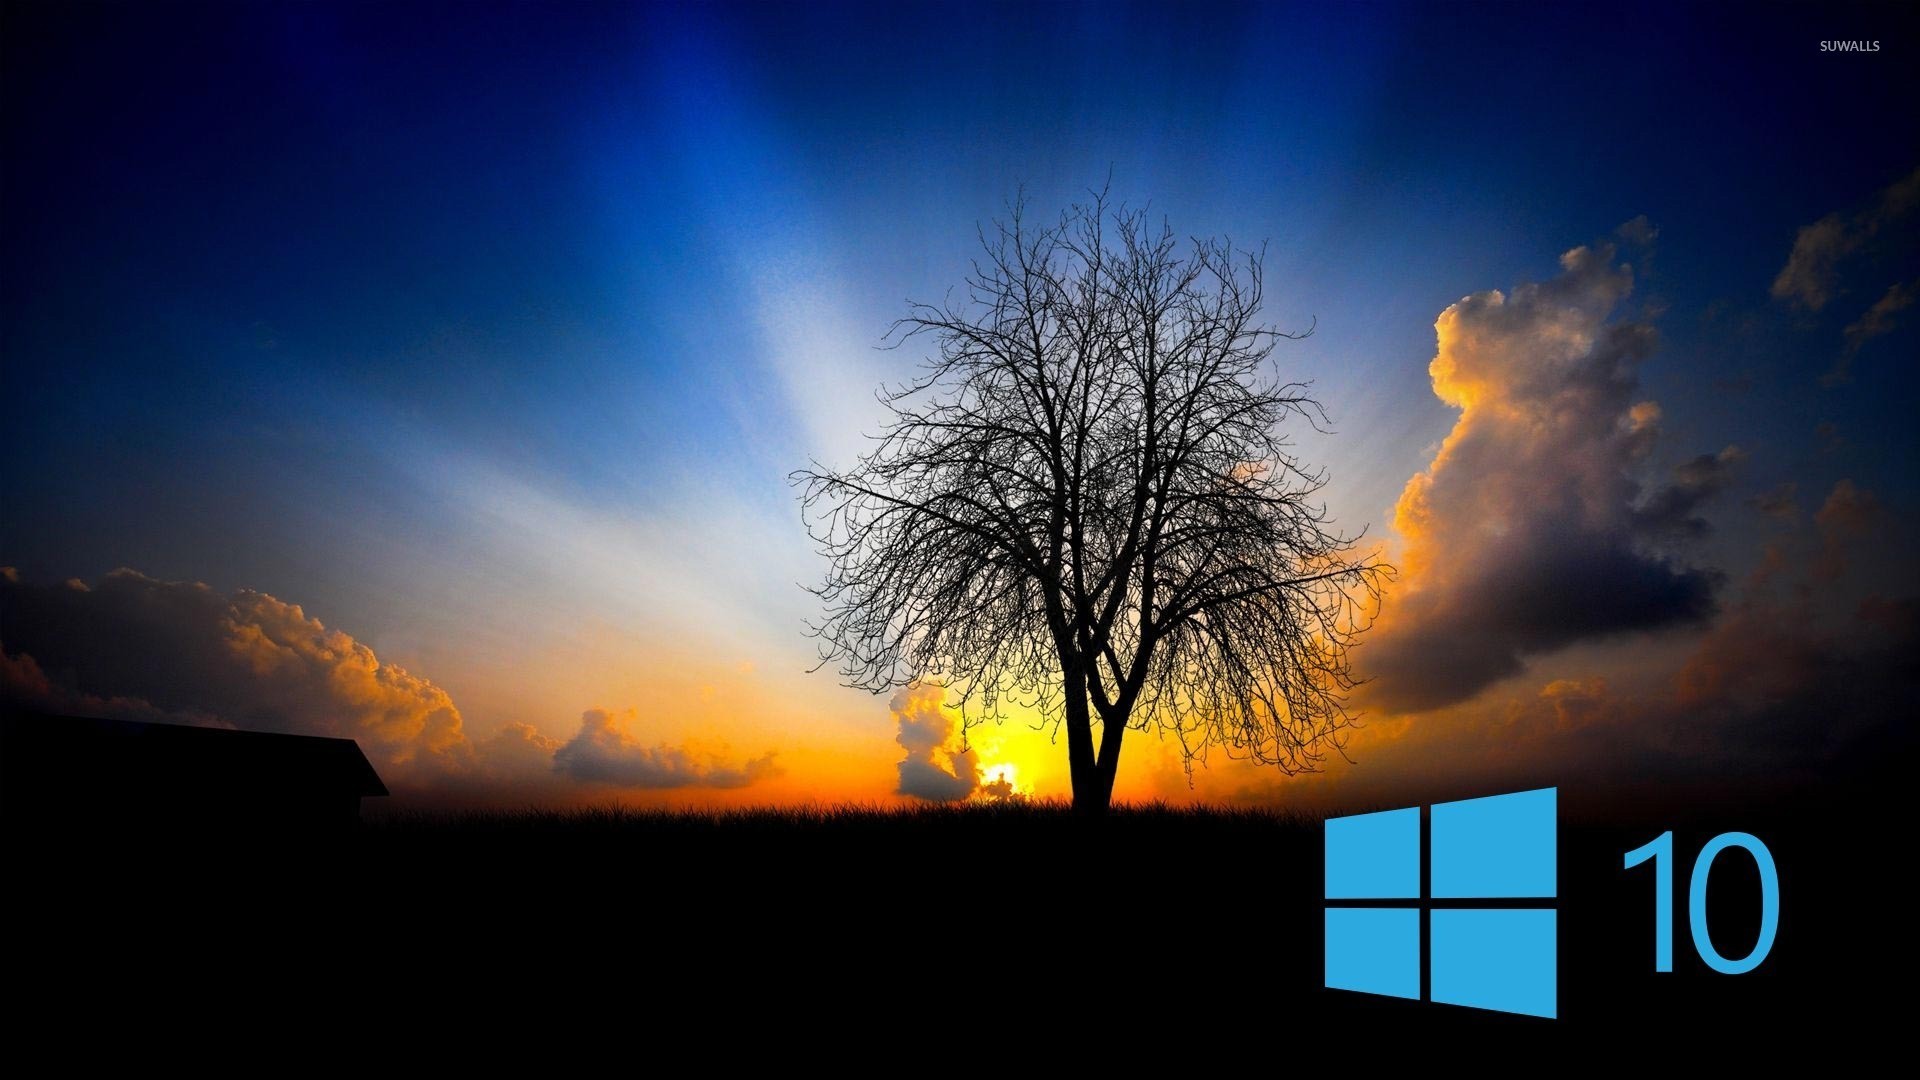 Windows 10 Wallpaper With high-resolution 1920X1080 pixel. You can use this wallpaper for your Windows and Mac OS computers as well as your Android and iPhone smartphones